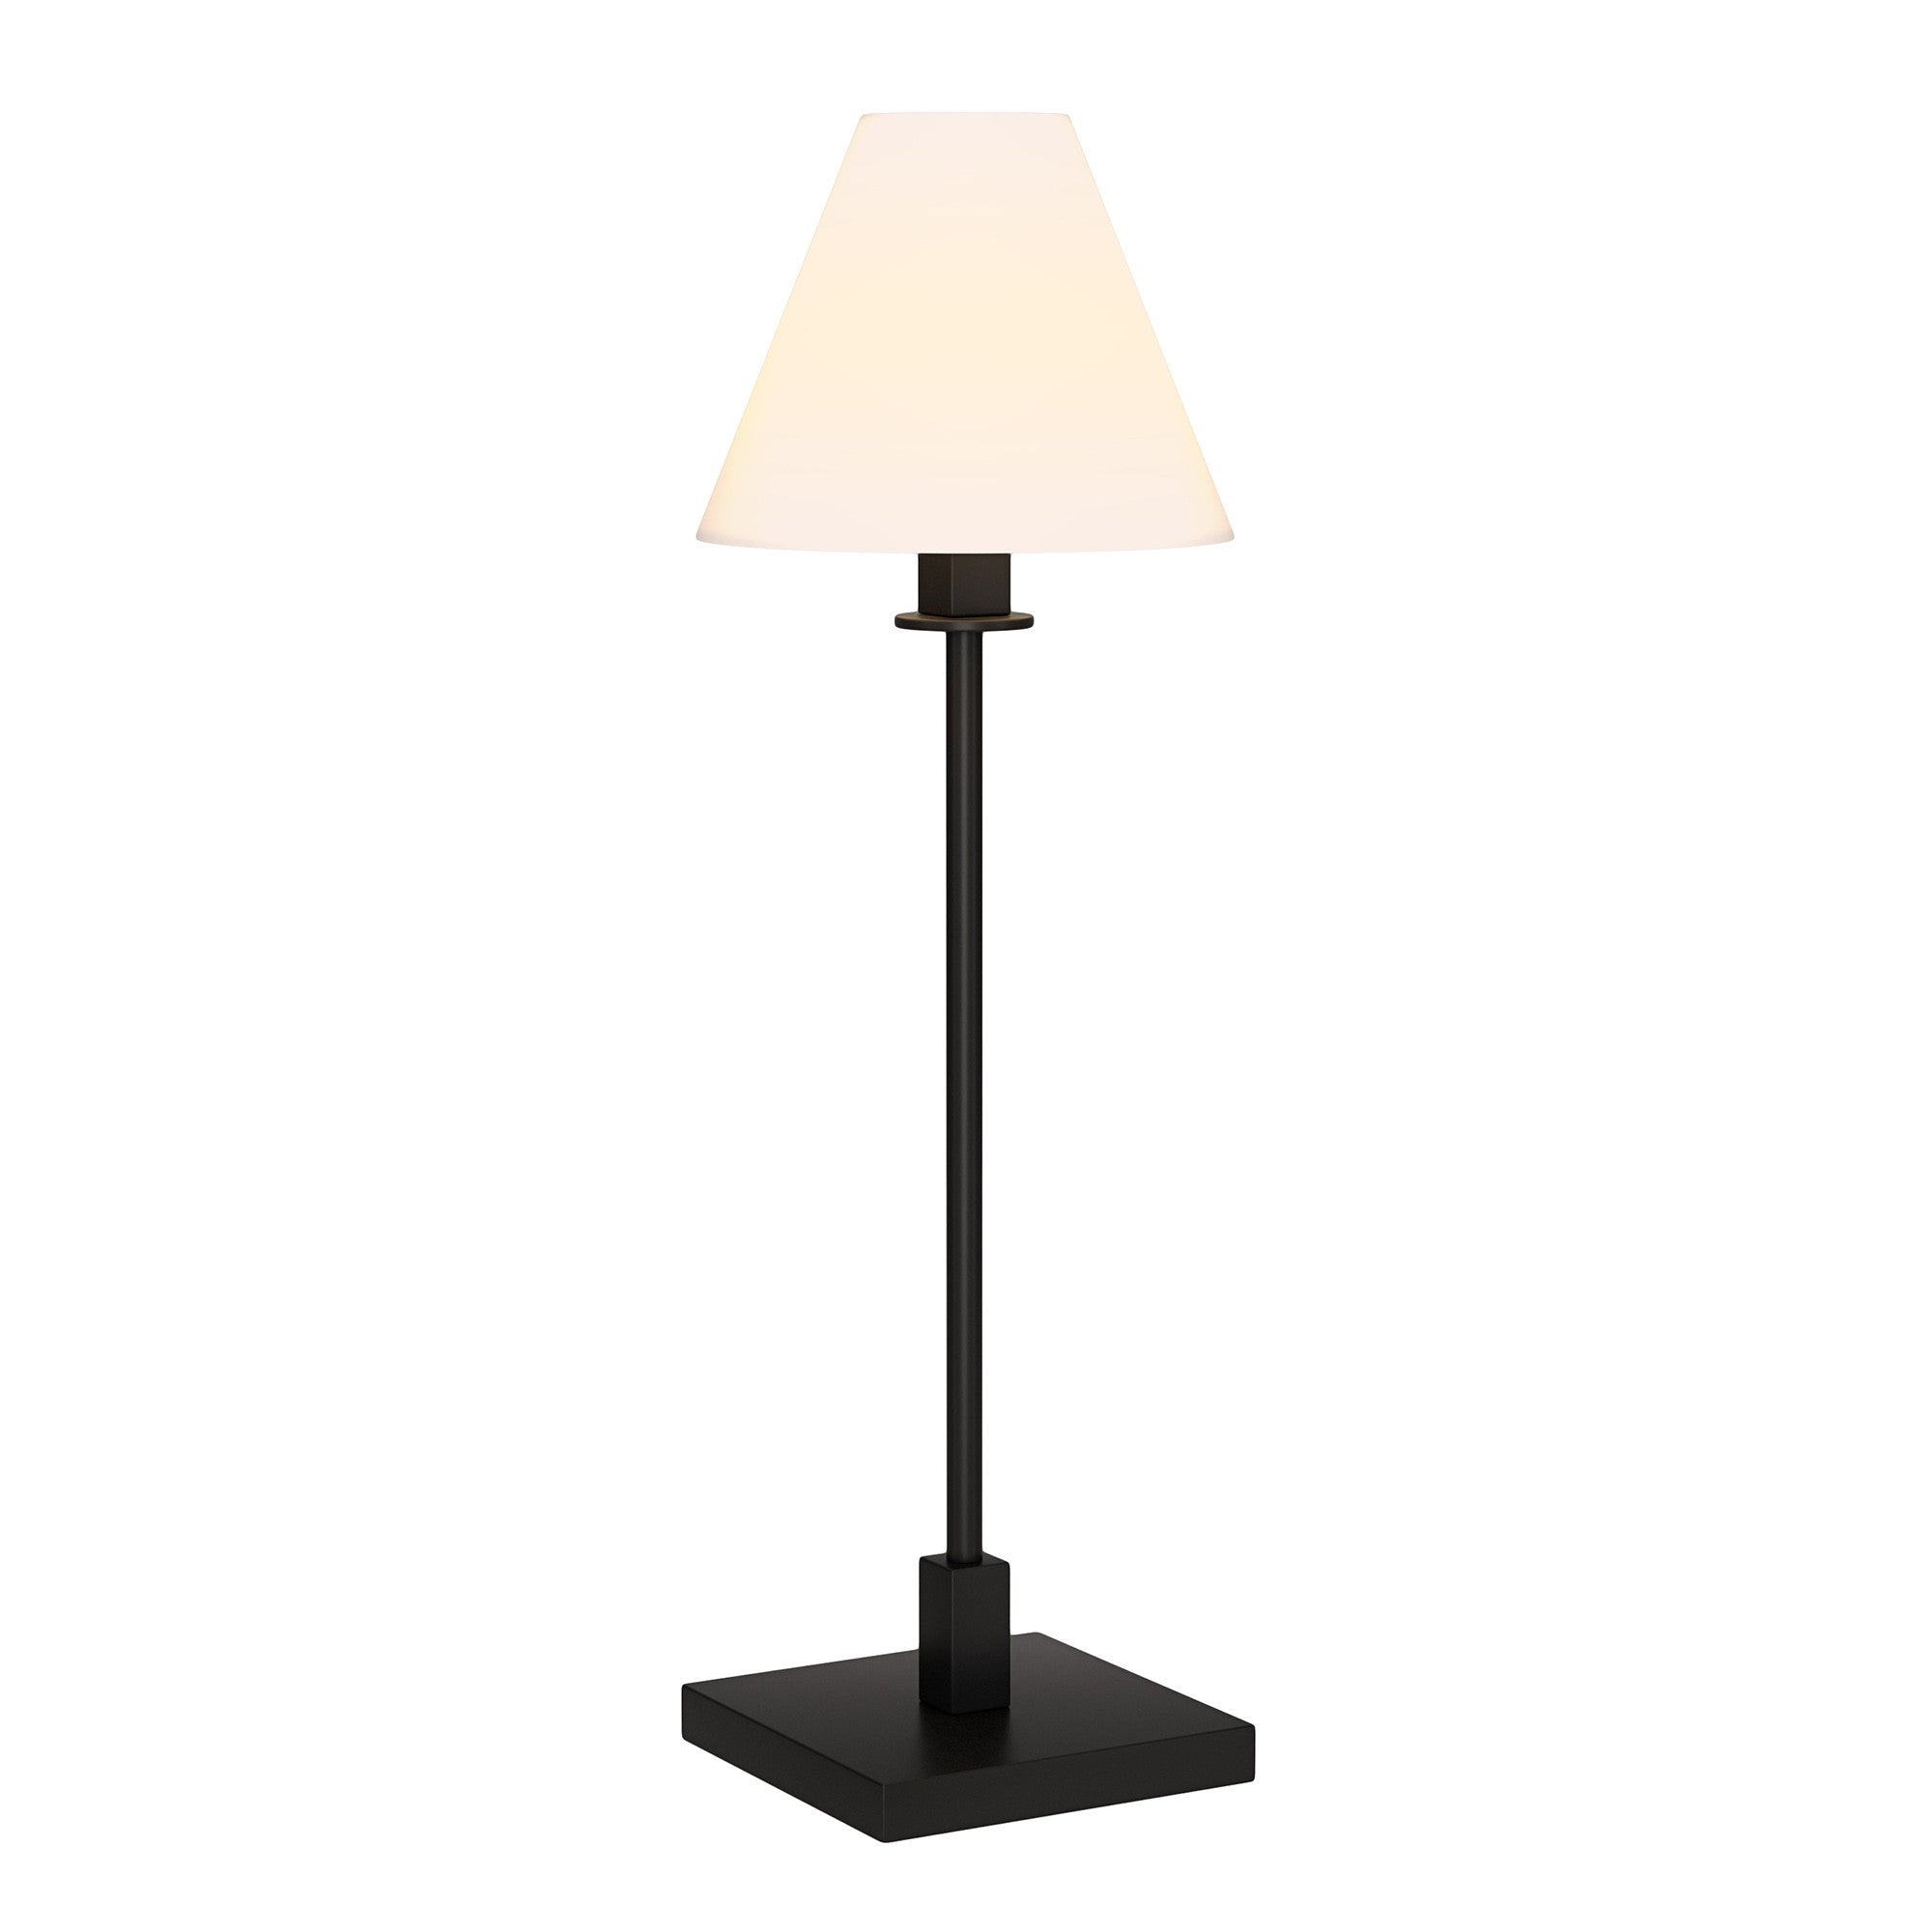 28" Black Metal Candlestick Table Lamp With White Cone Shade